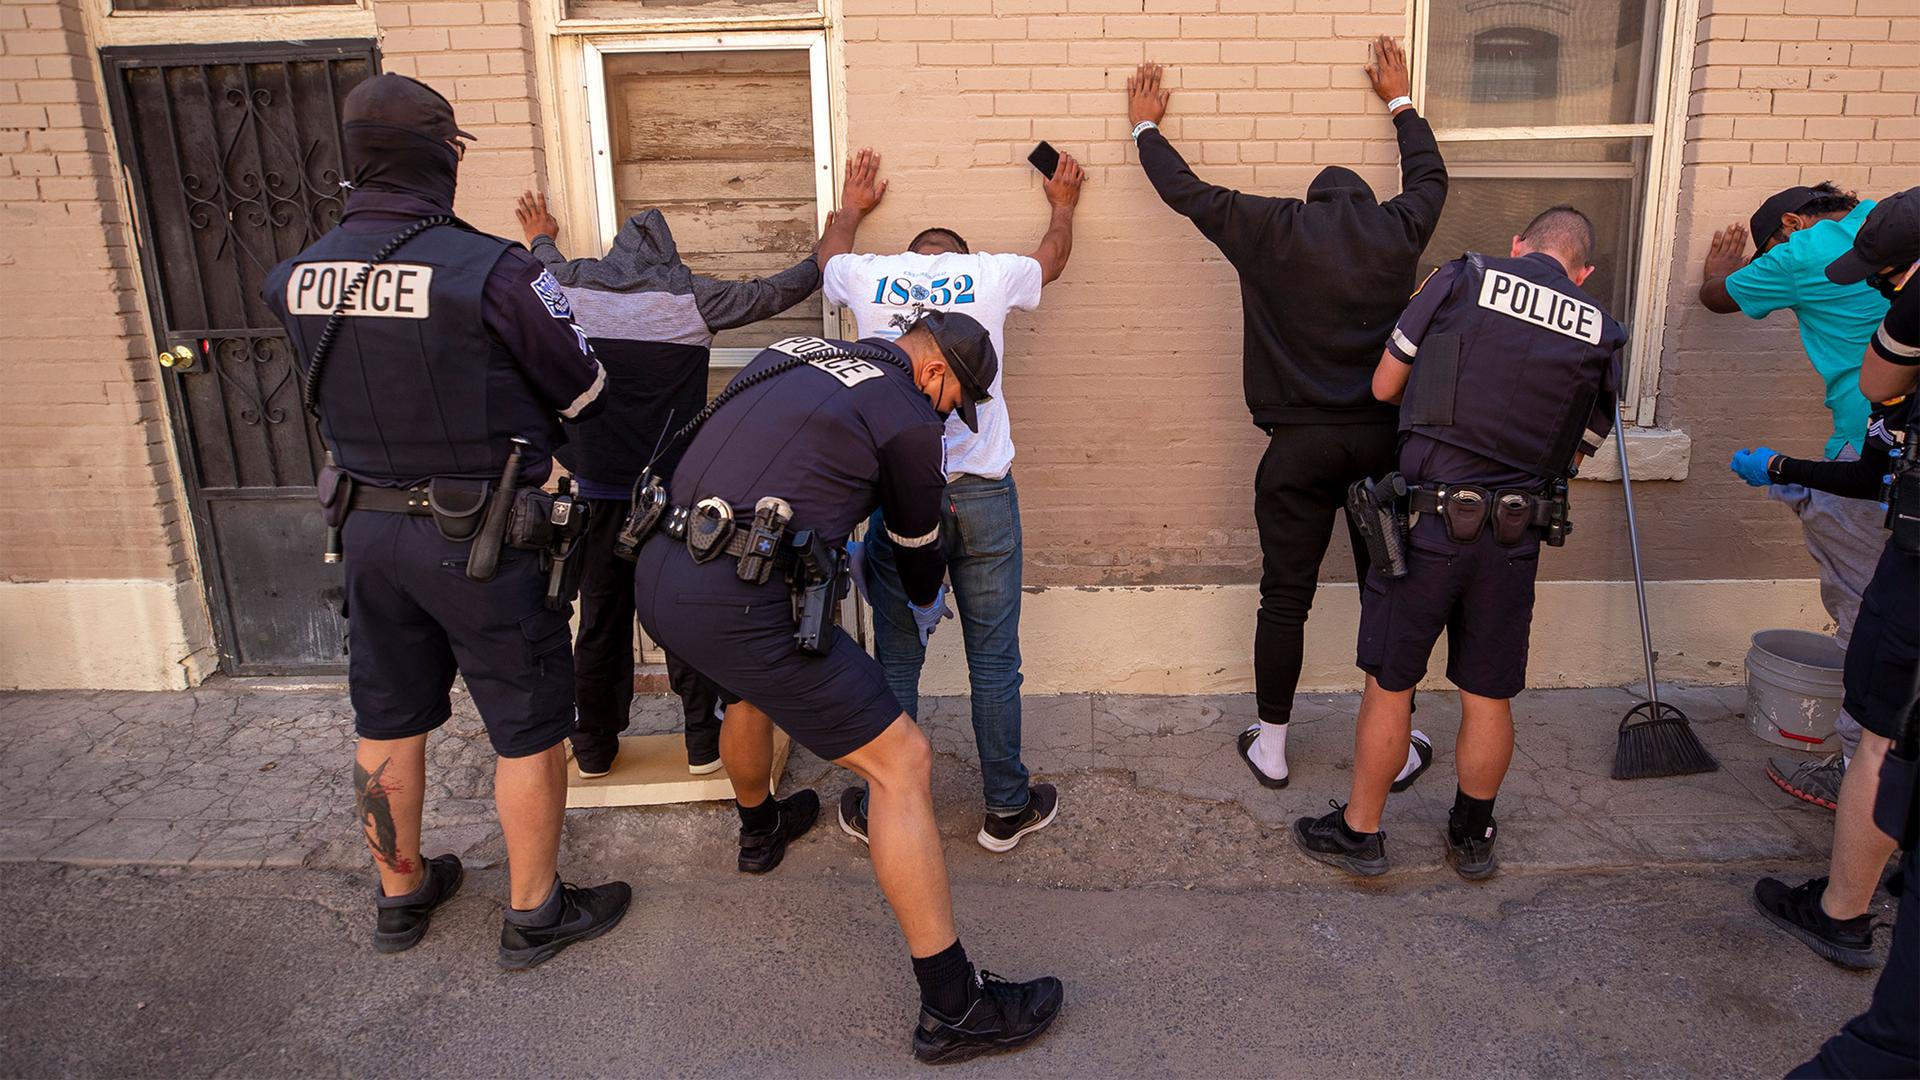 Under the suspicion of drug consumption, police officers frisk a group of migrants at a camp on a street in downtown El Paso, Texas, April 30, 2023.